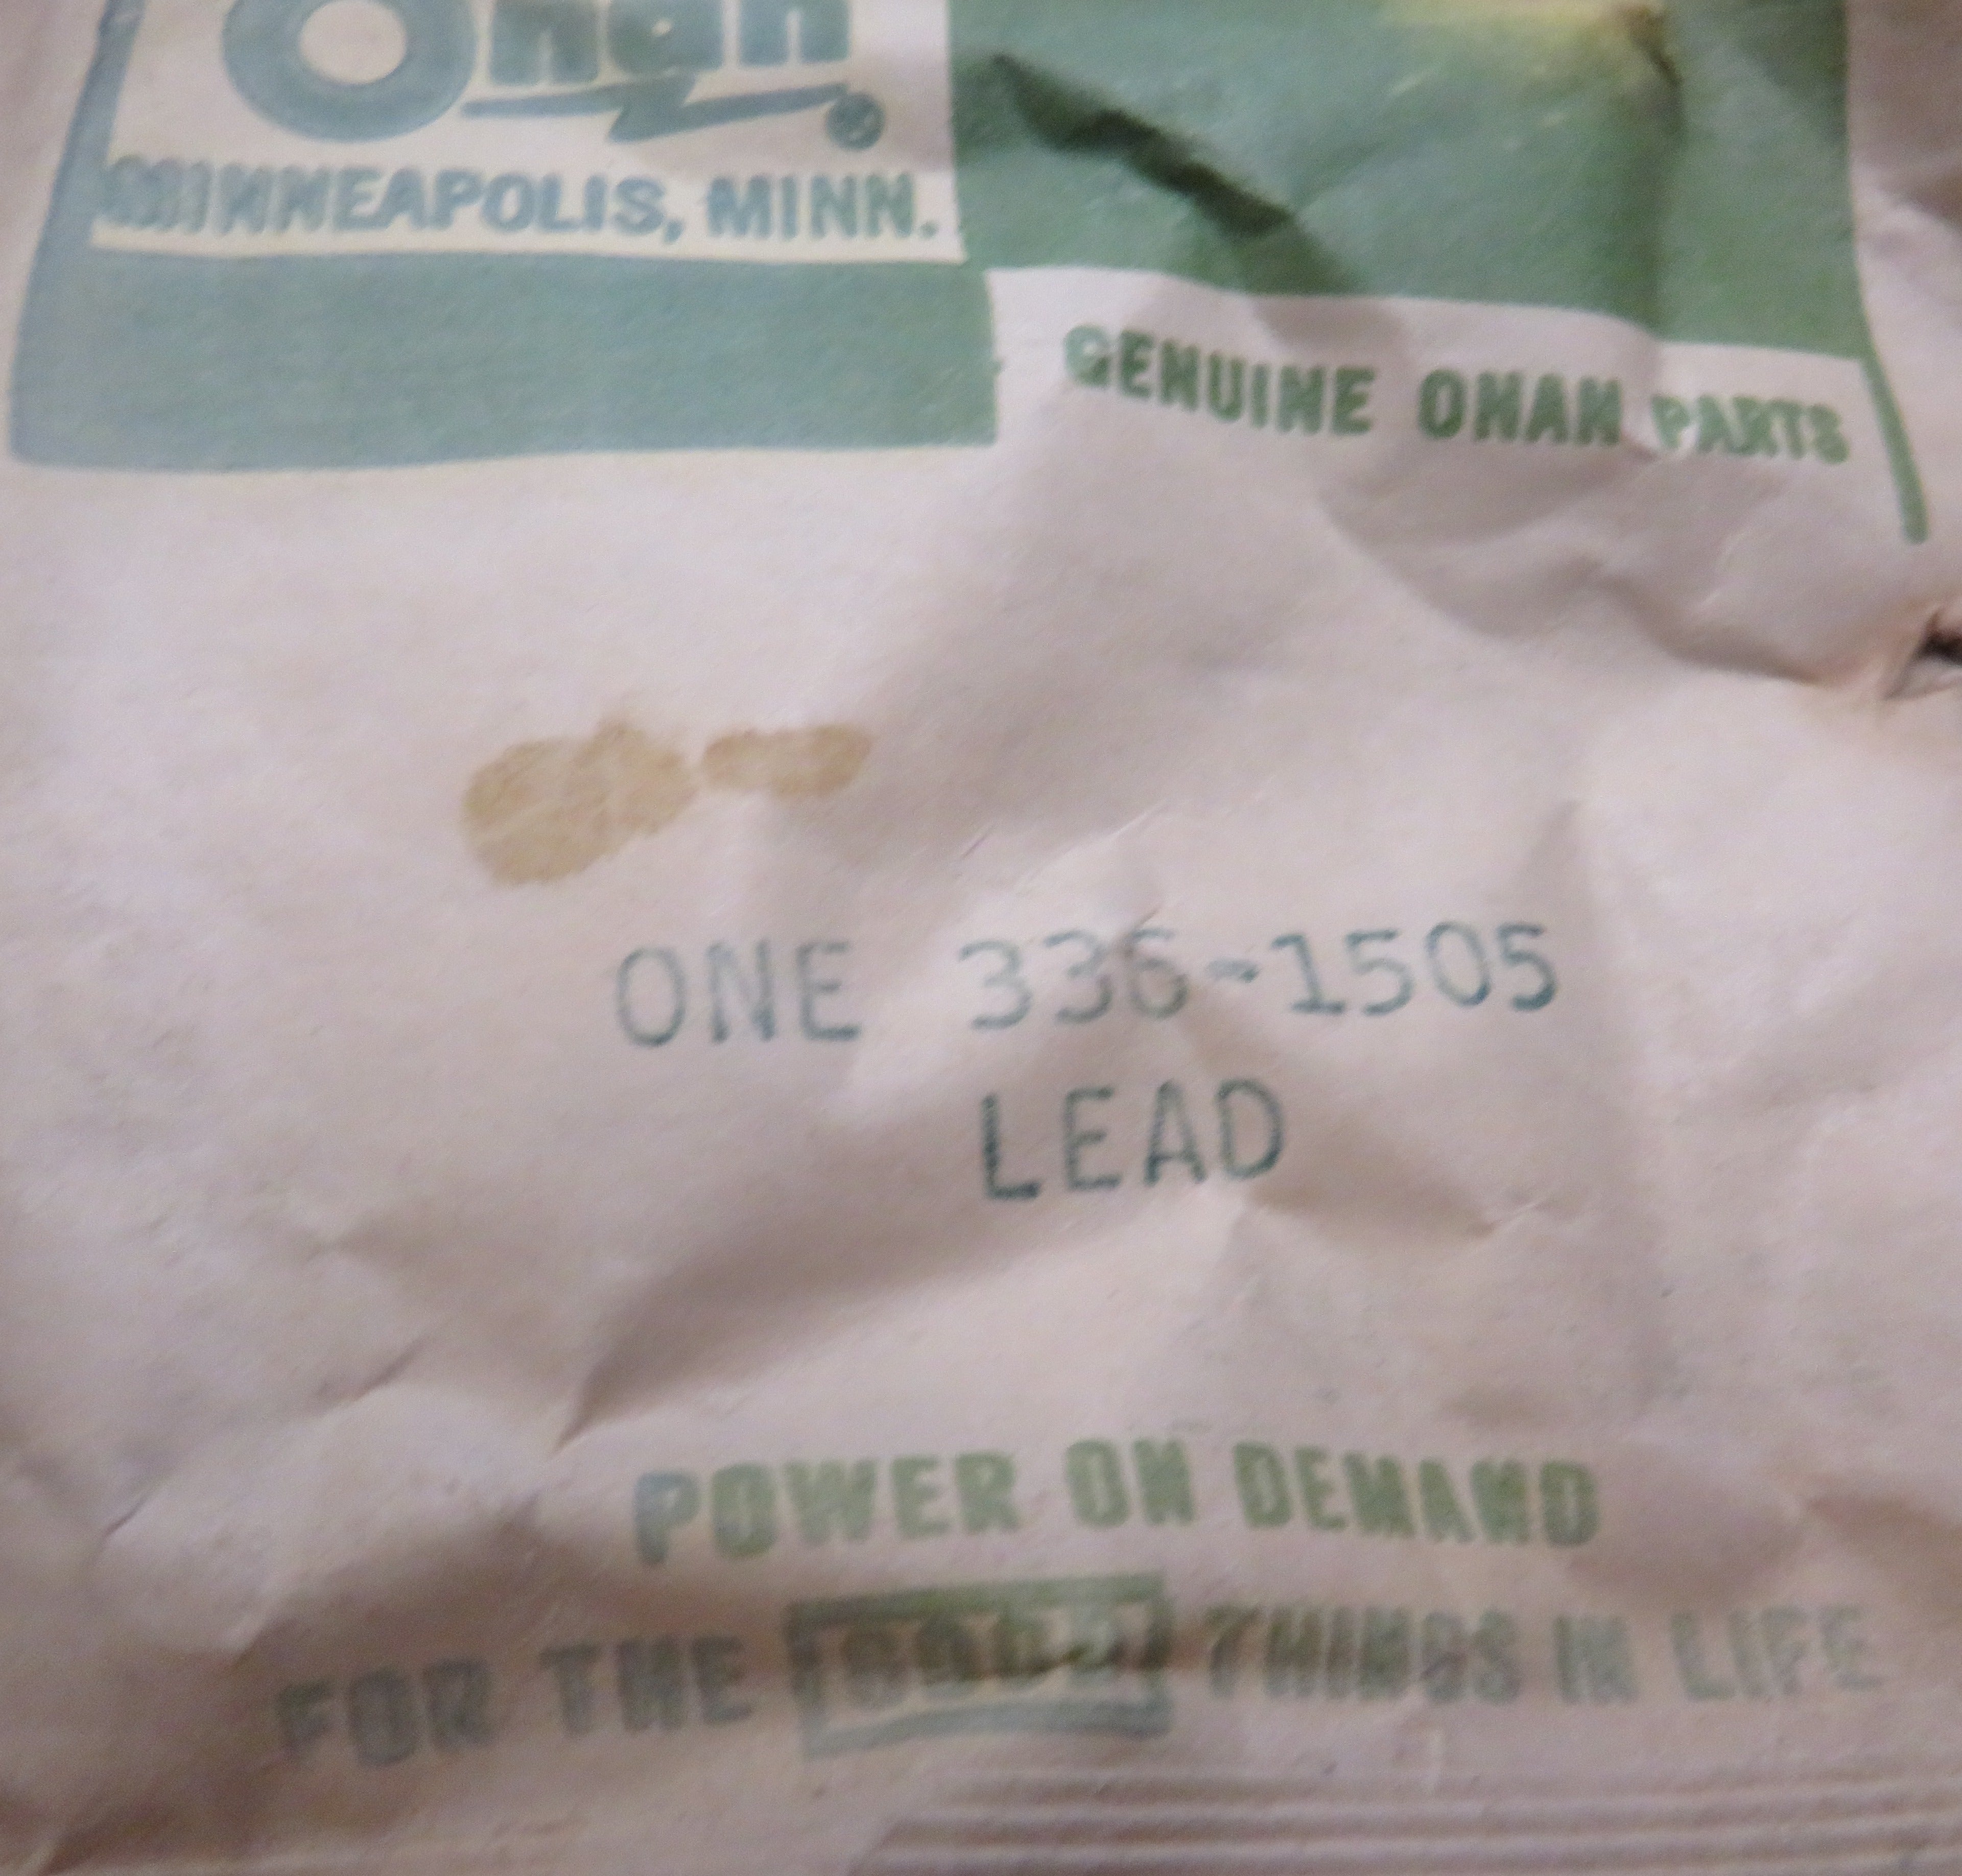 Onan 336-1505 Lead for No 1 Cylinder (5 1/4